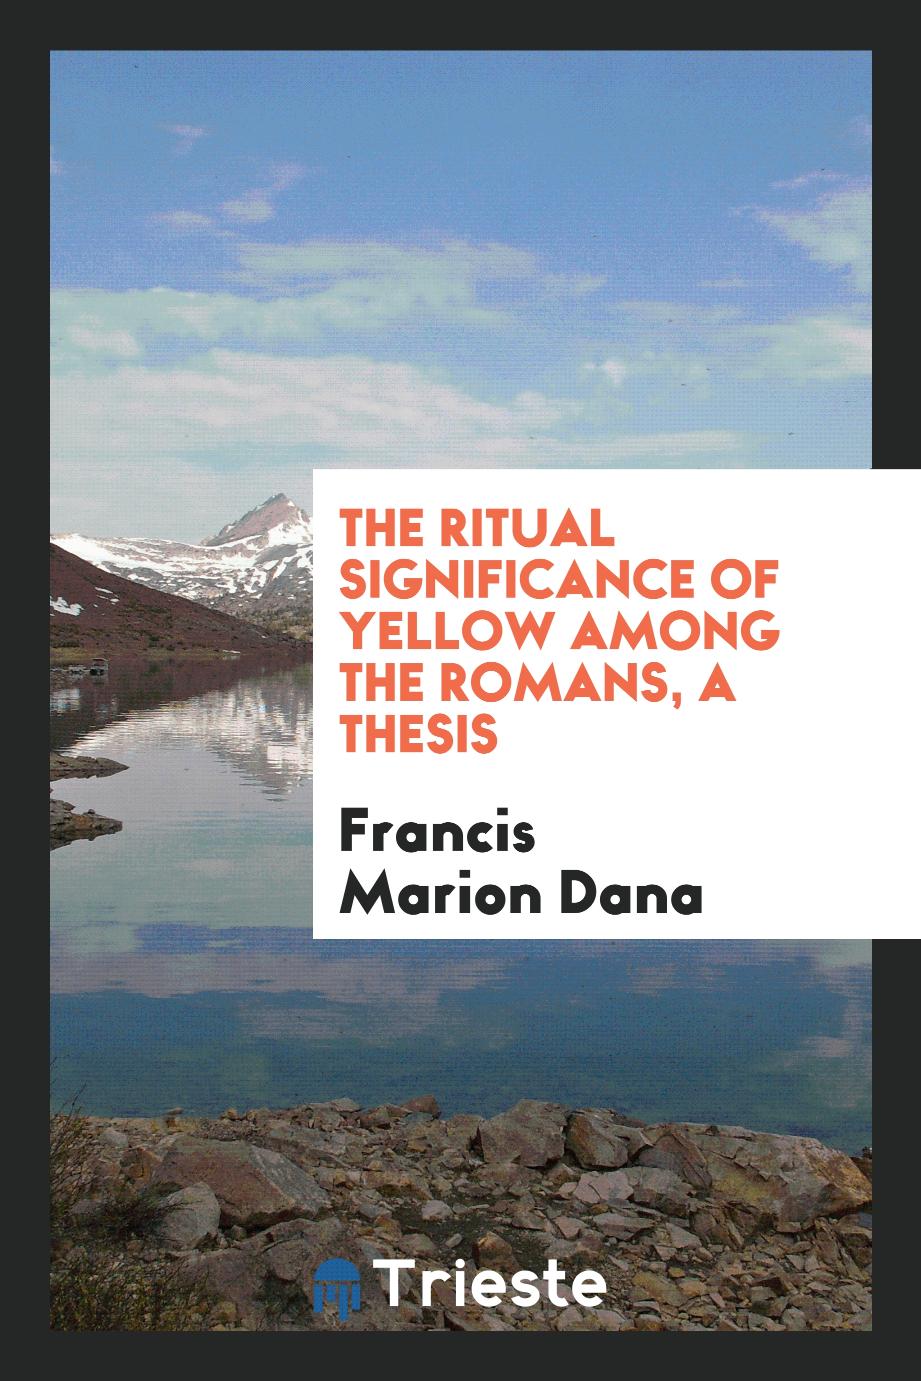 The ritual significance of yellow among the Romans, a thesis